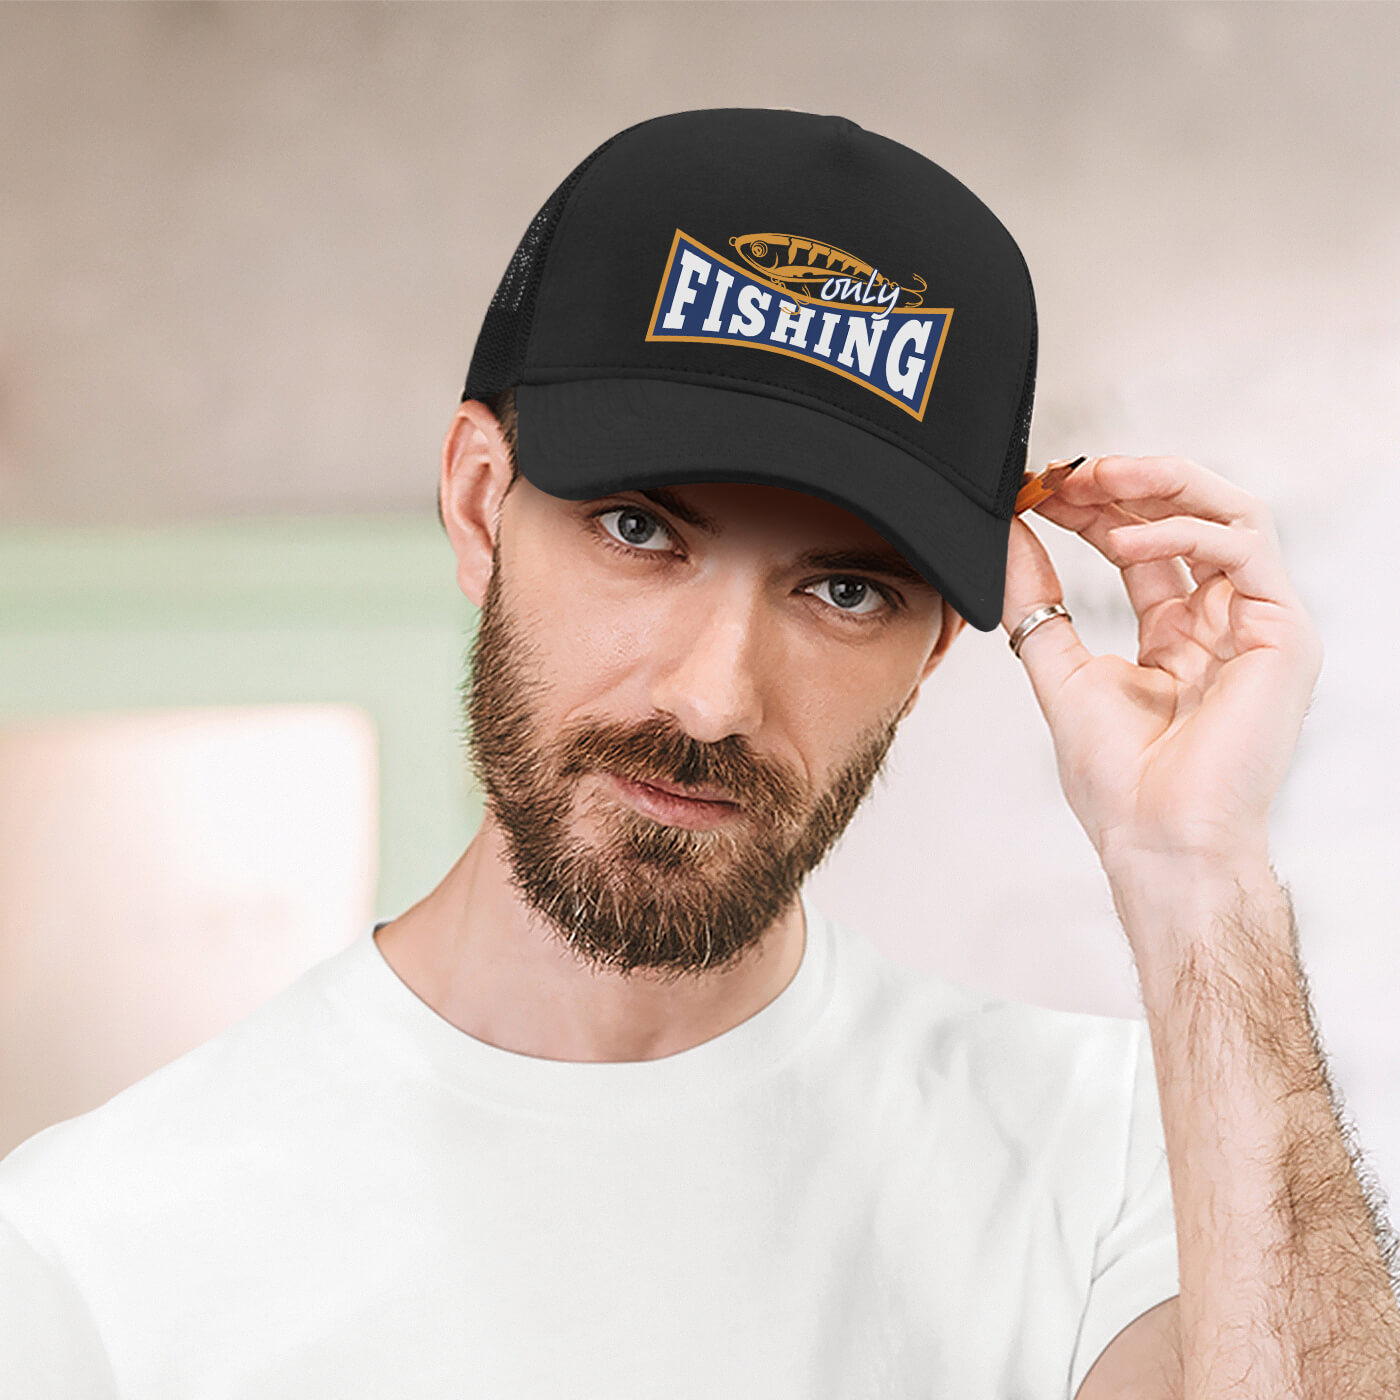 Man Jersey Cap With Print Fishing Only - Stylish Gifts For